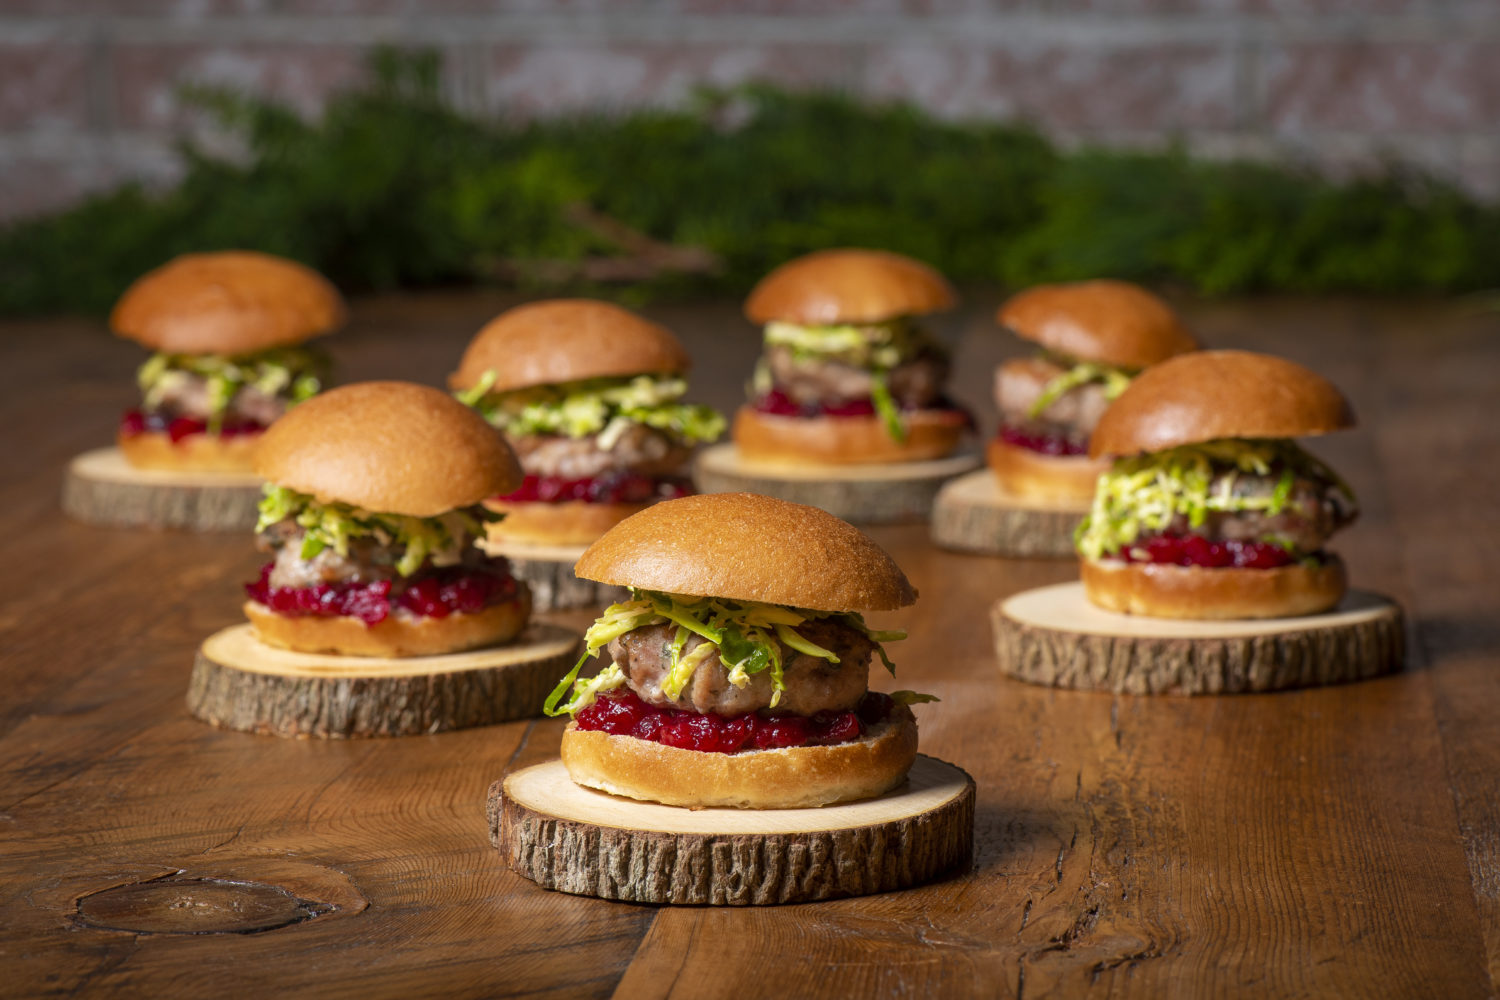 Turkey Sliders with brussels sprout slaw & cranberry chutney